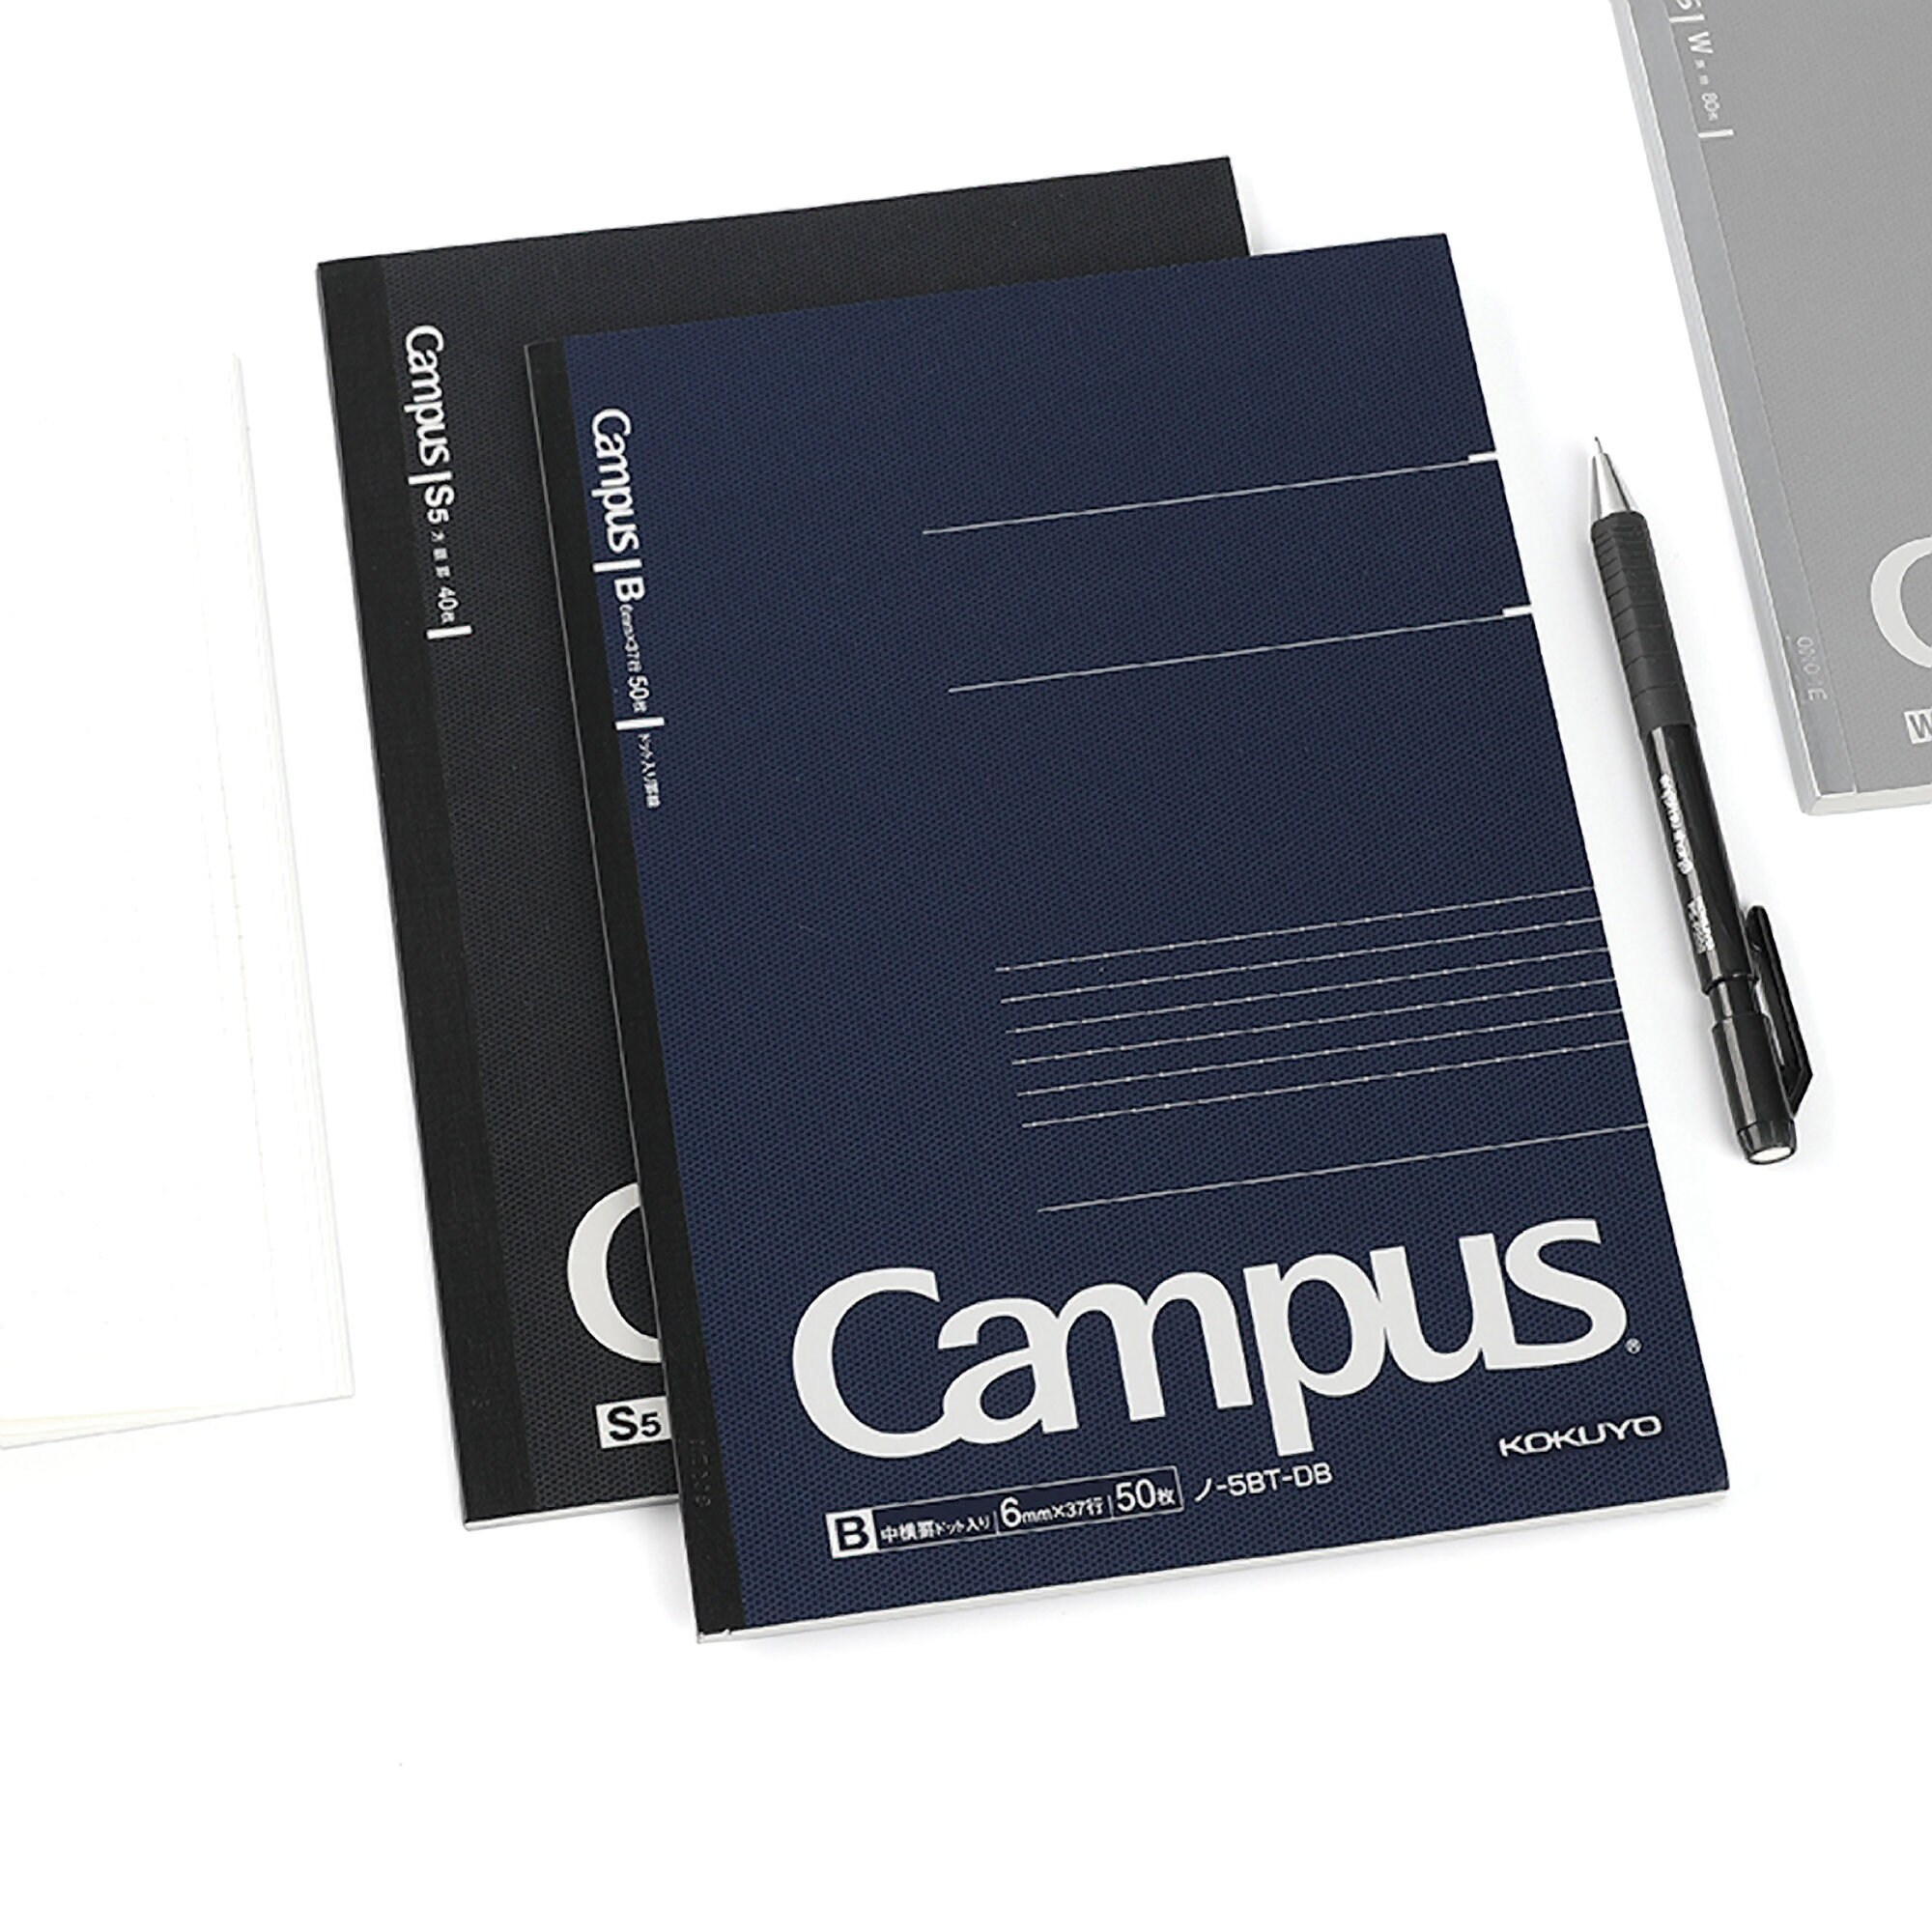 Free shipping Kokuyo Campus Note Notebook A4 size 297mm x 210mm 40sheets Japan 